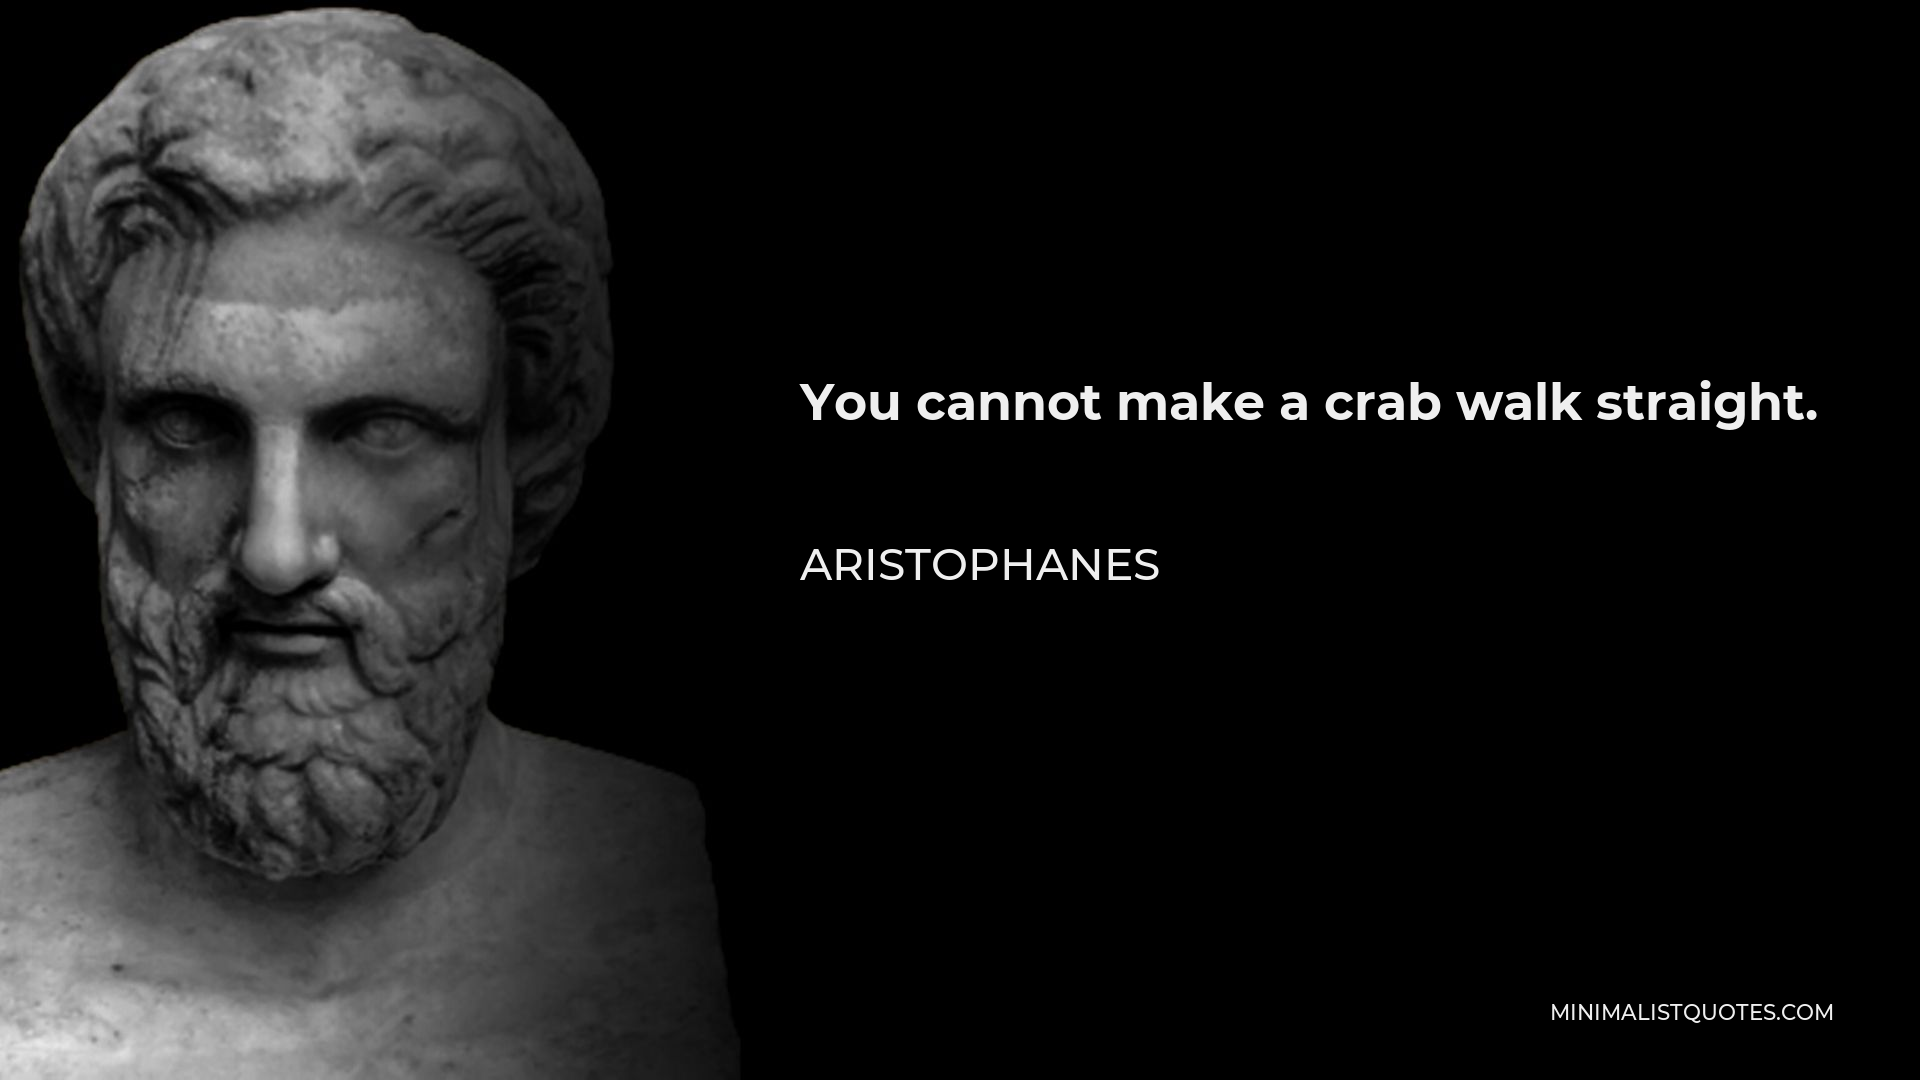 Aristophanes Quote - You cannot make a crab walk straight.